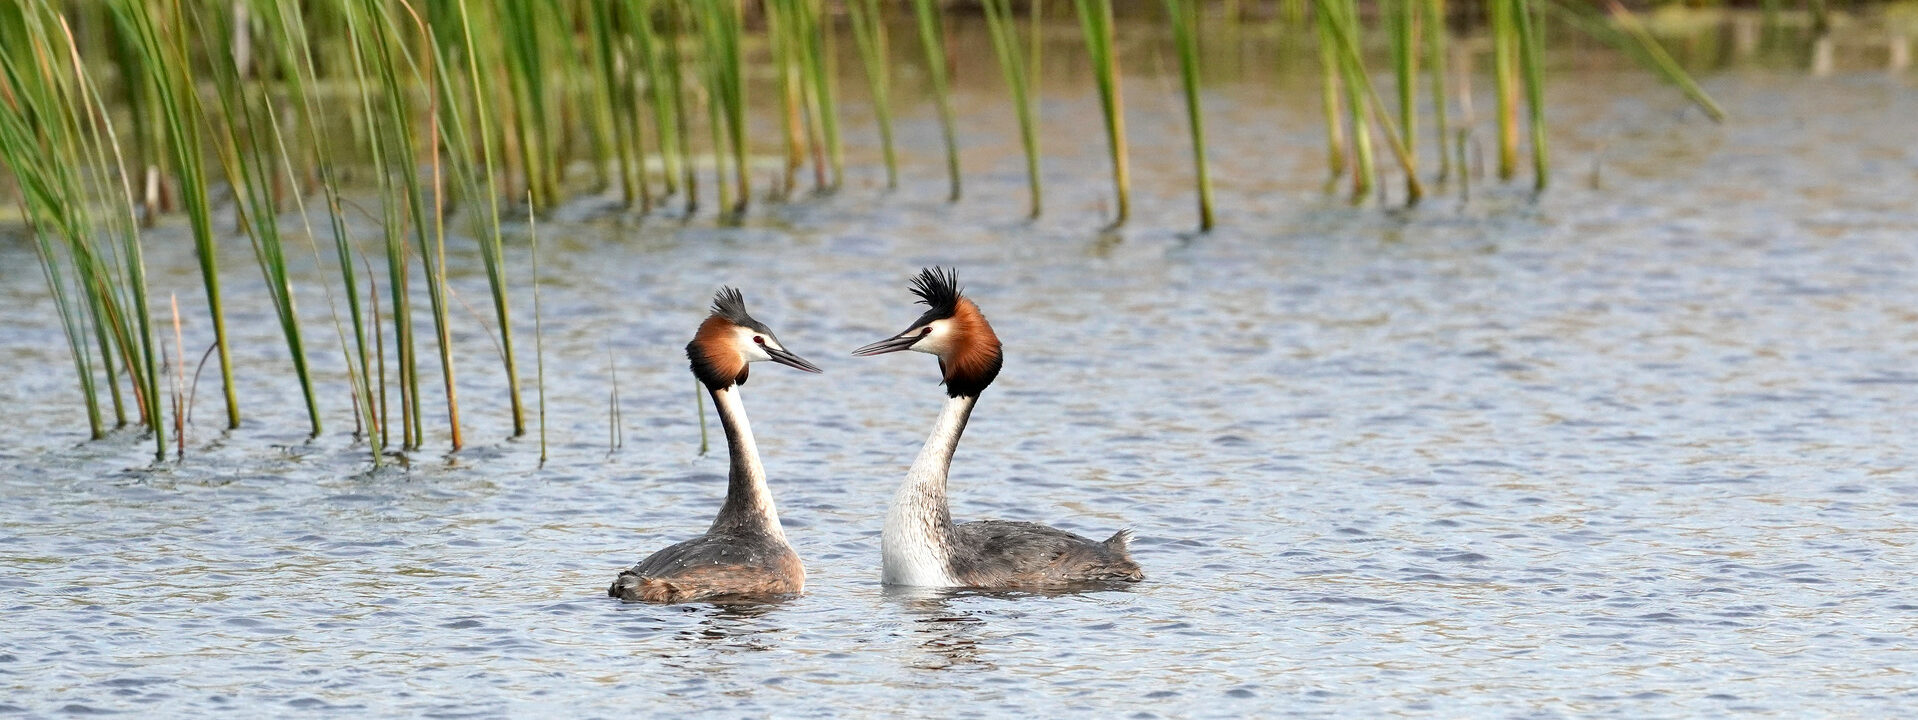 Great Crested Grebes By Jim Higham Aspect Ratio 1280 480